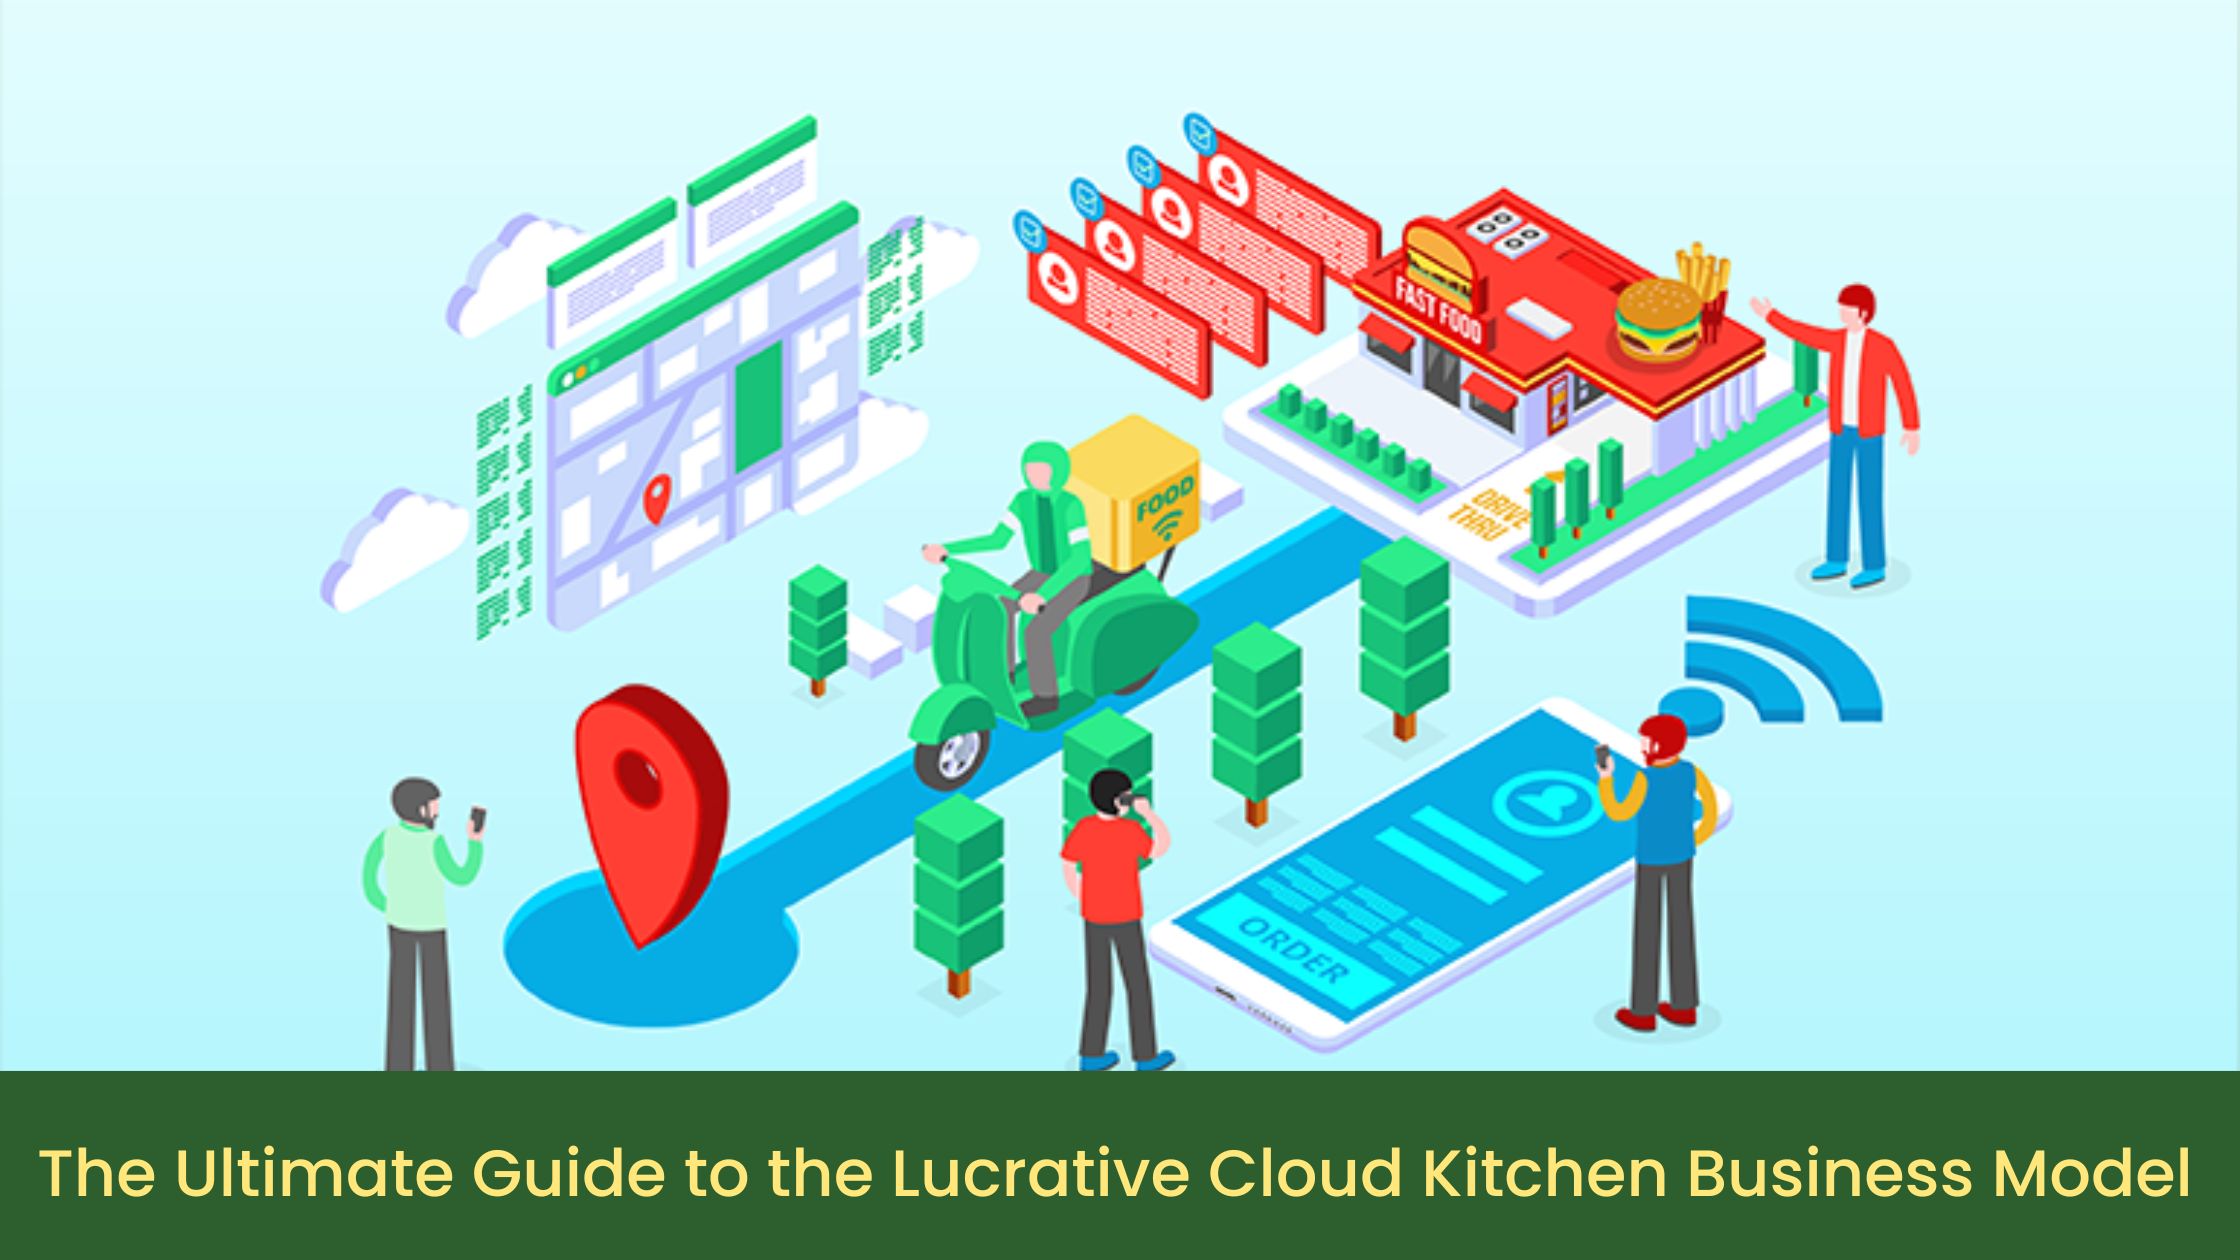 The Ultimate Guide to the Lucrative Cloud Kitchen Business Model